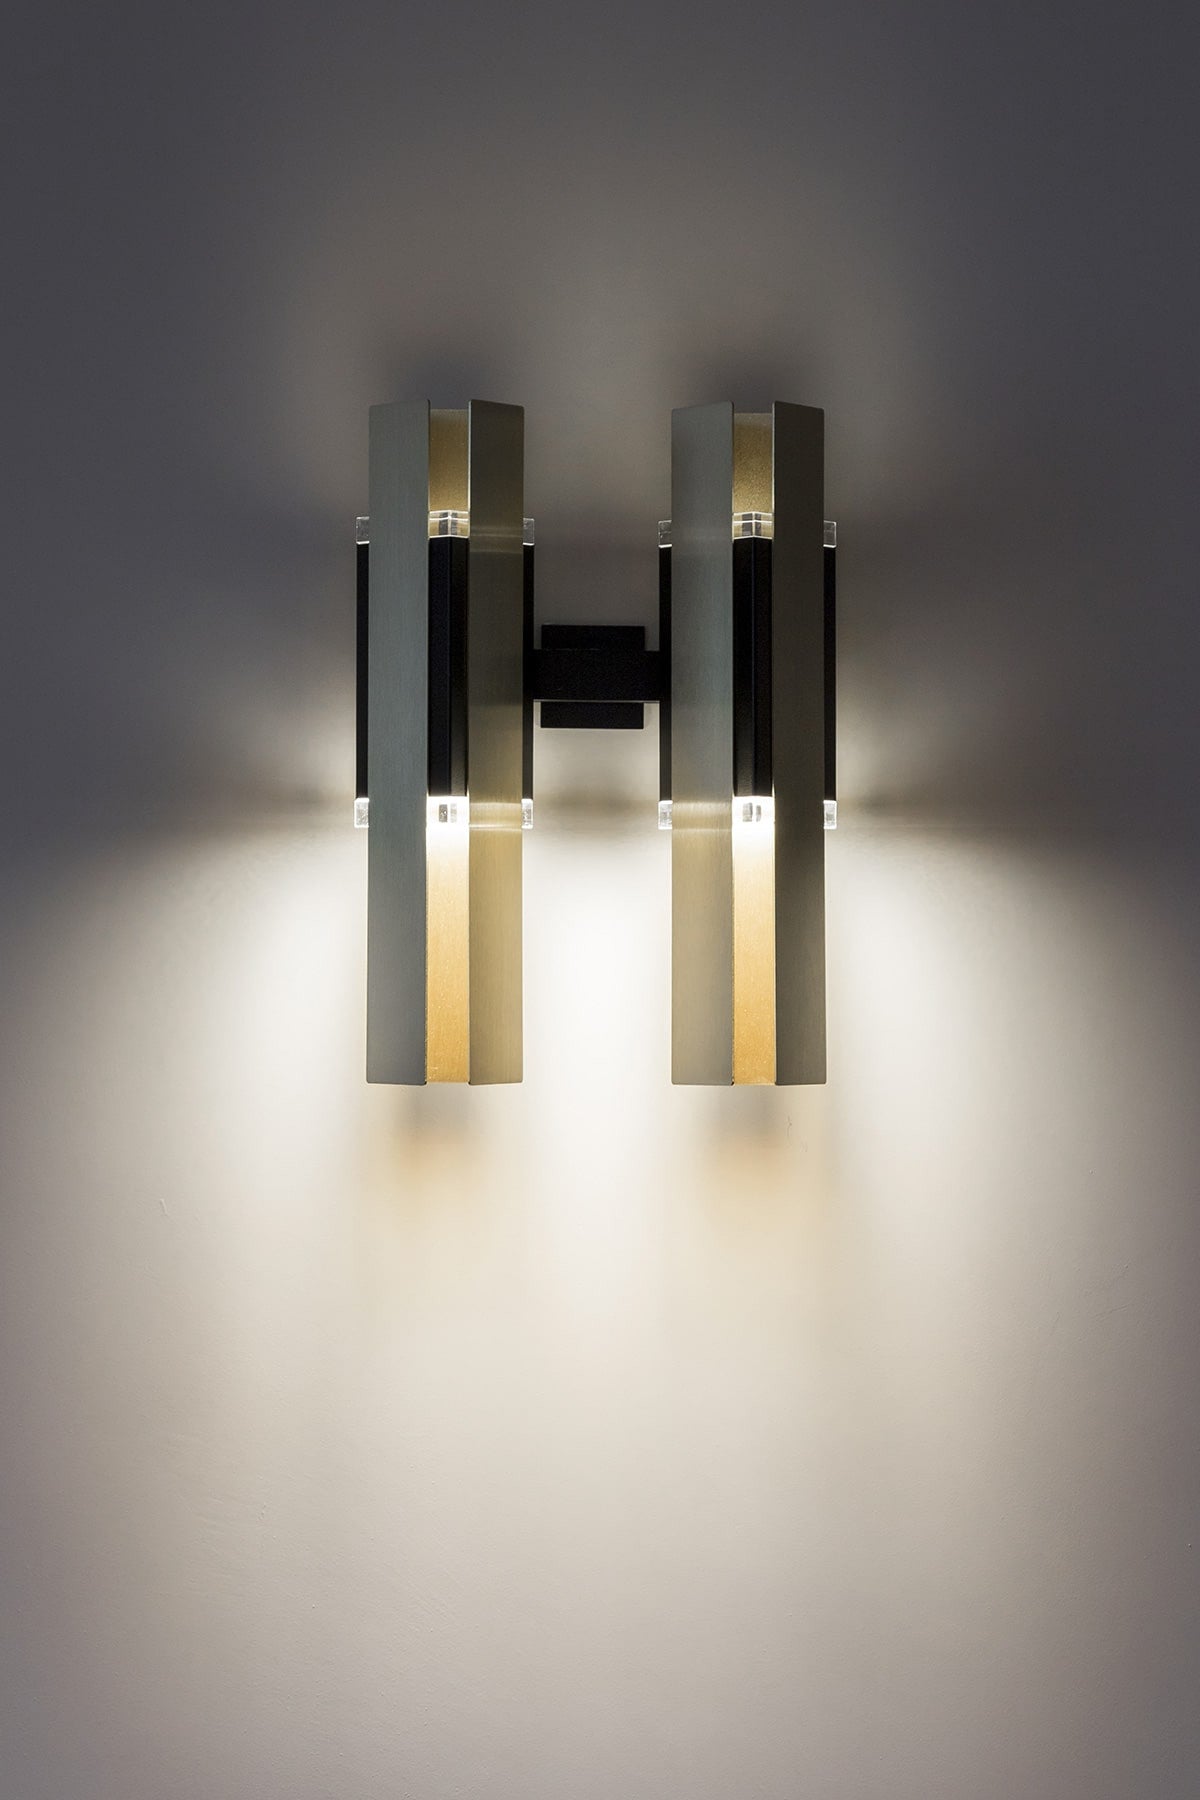 EXCALIBUR WALL LIGHT 559.42 BY TOOY $1,798.00